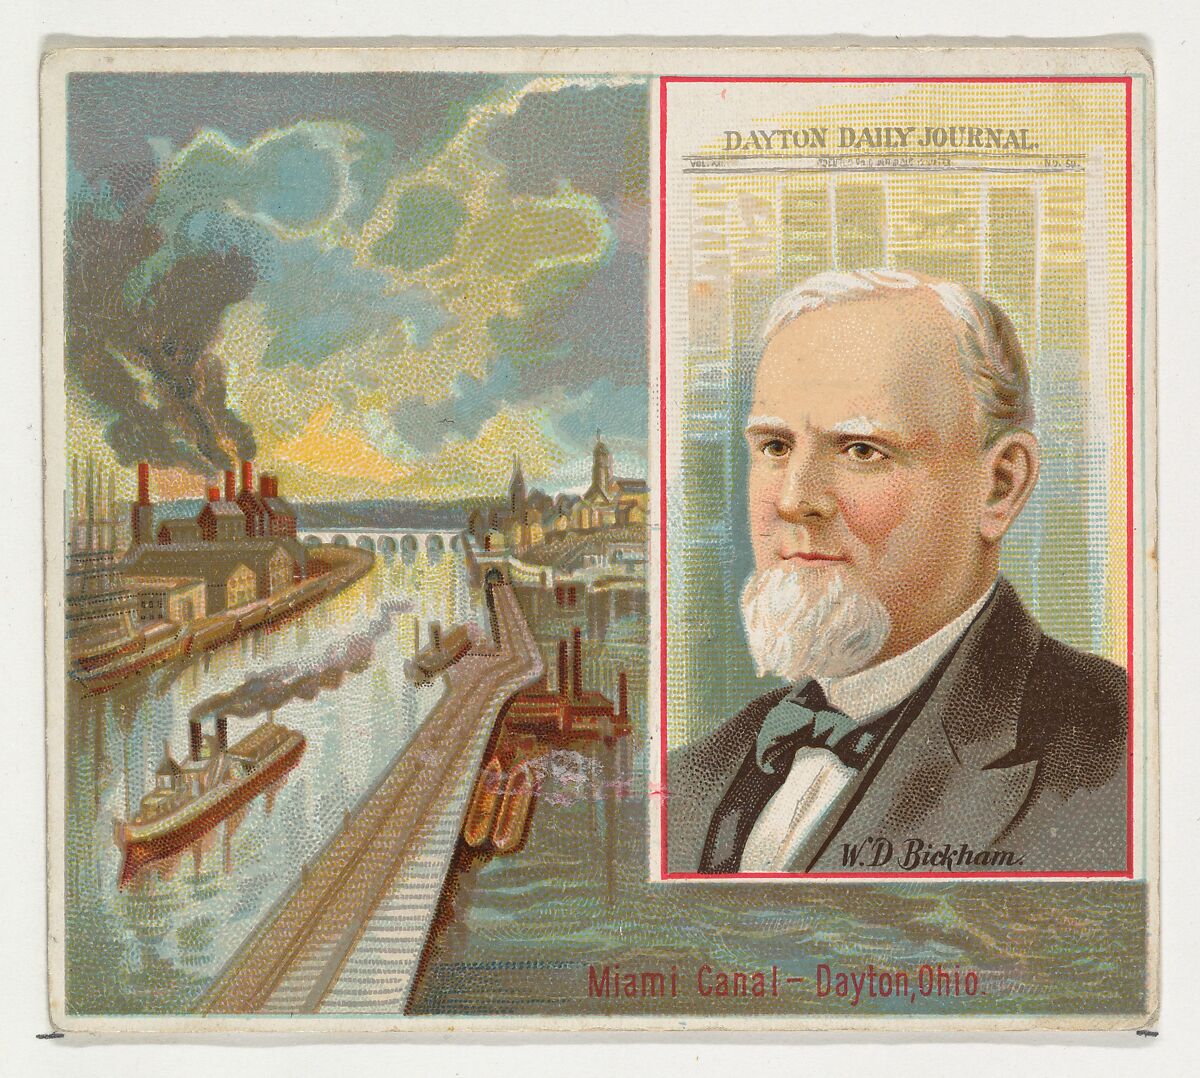 W.D. Bickham, Dayton Daily Journal, from the American Editors series (N35) for Allen & Ginter Cigarettes, Issued by Allen &amp; Ginter (American, Richmond, Virginia), Commercial color lithograph 